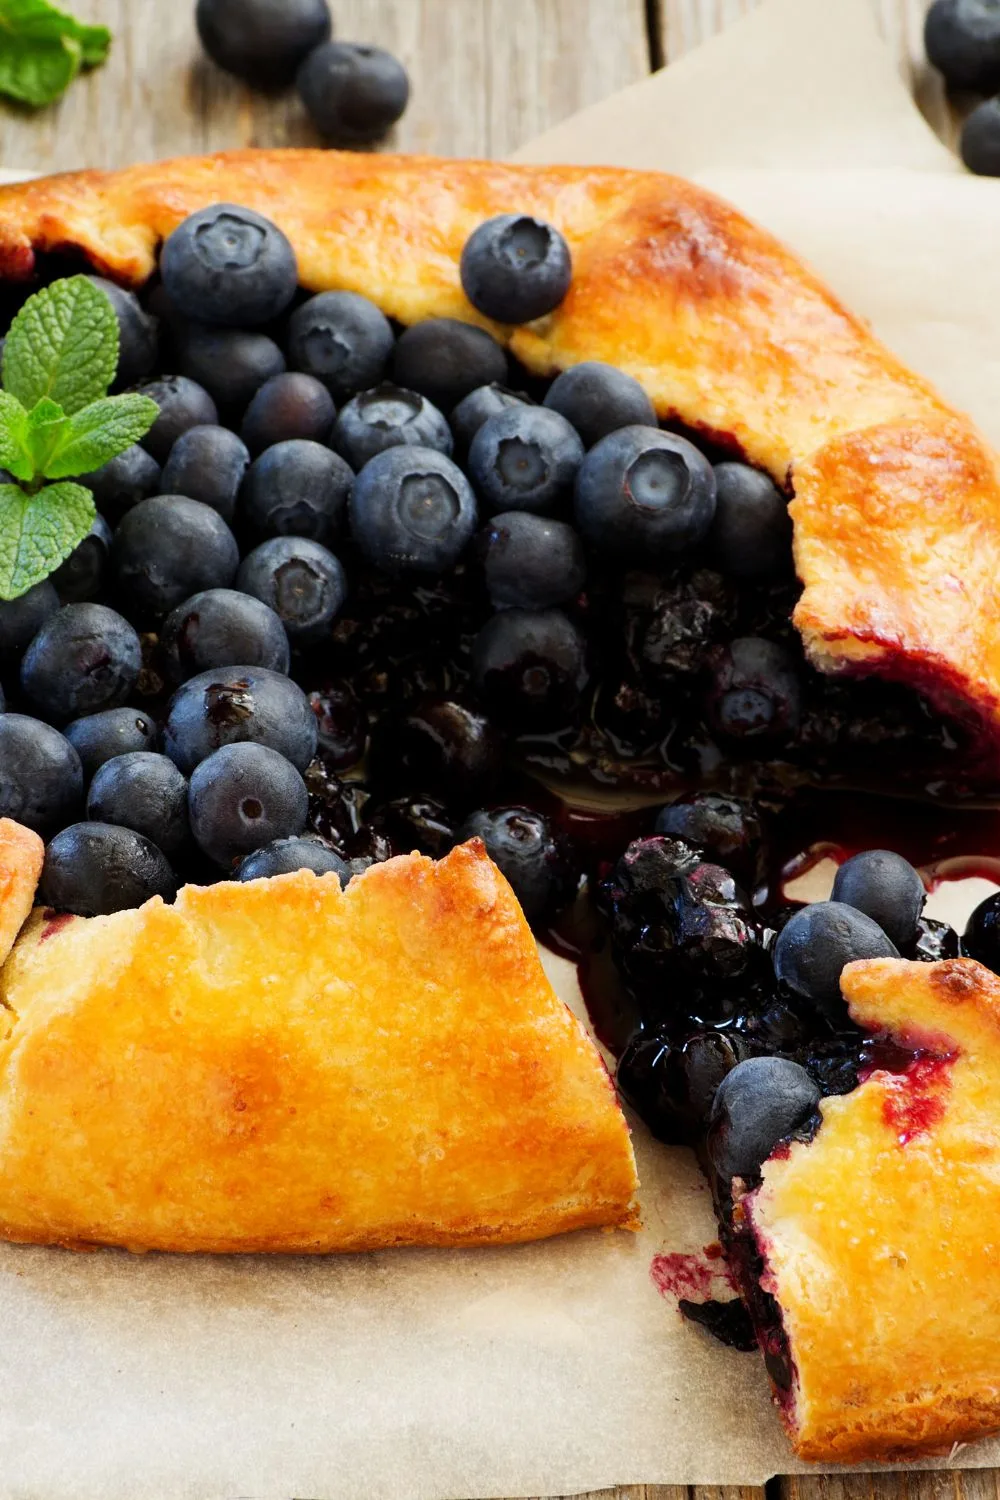 an up close view of a pastry filled up with blueberries and blueberry filling